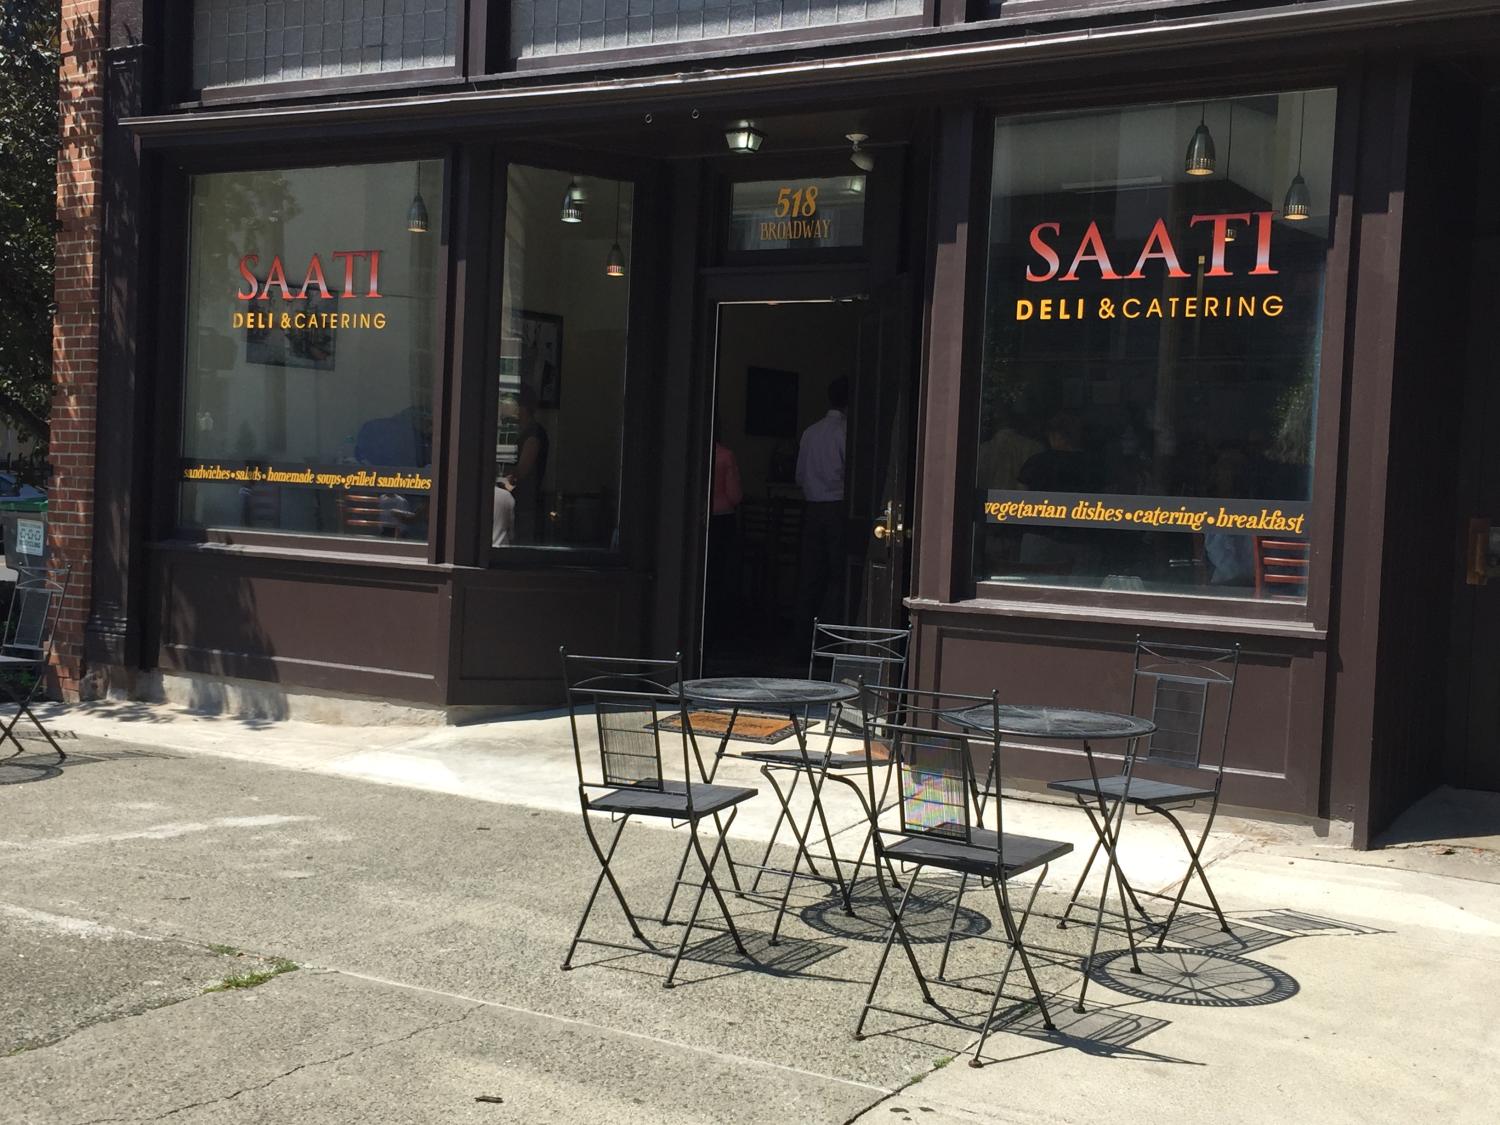 Photo of outside of Saati Deli & Catering